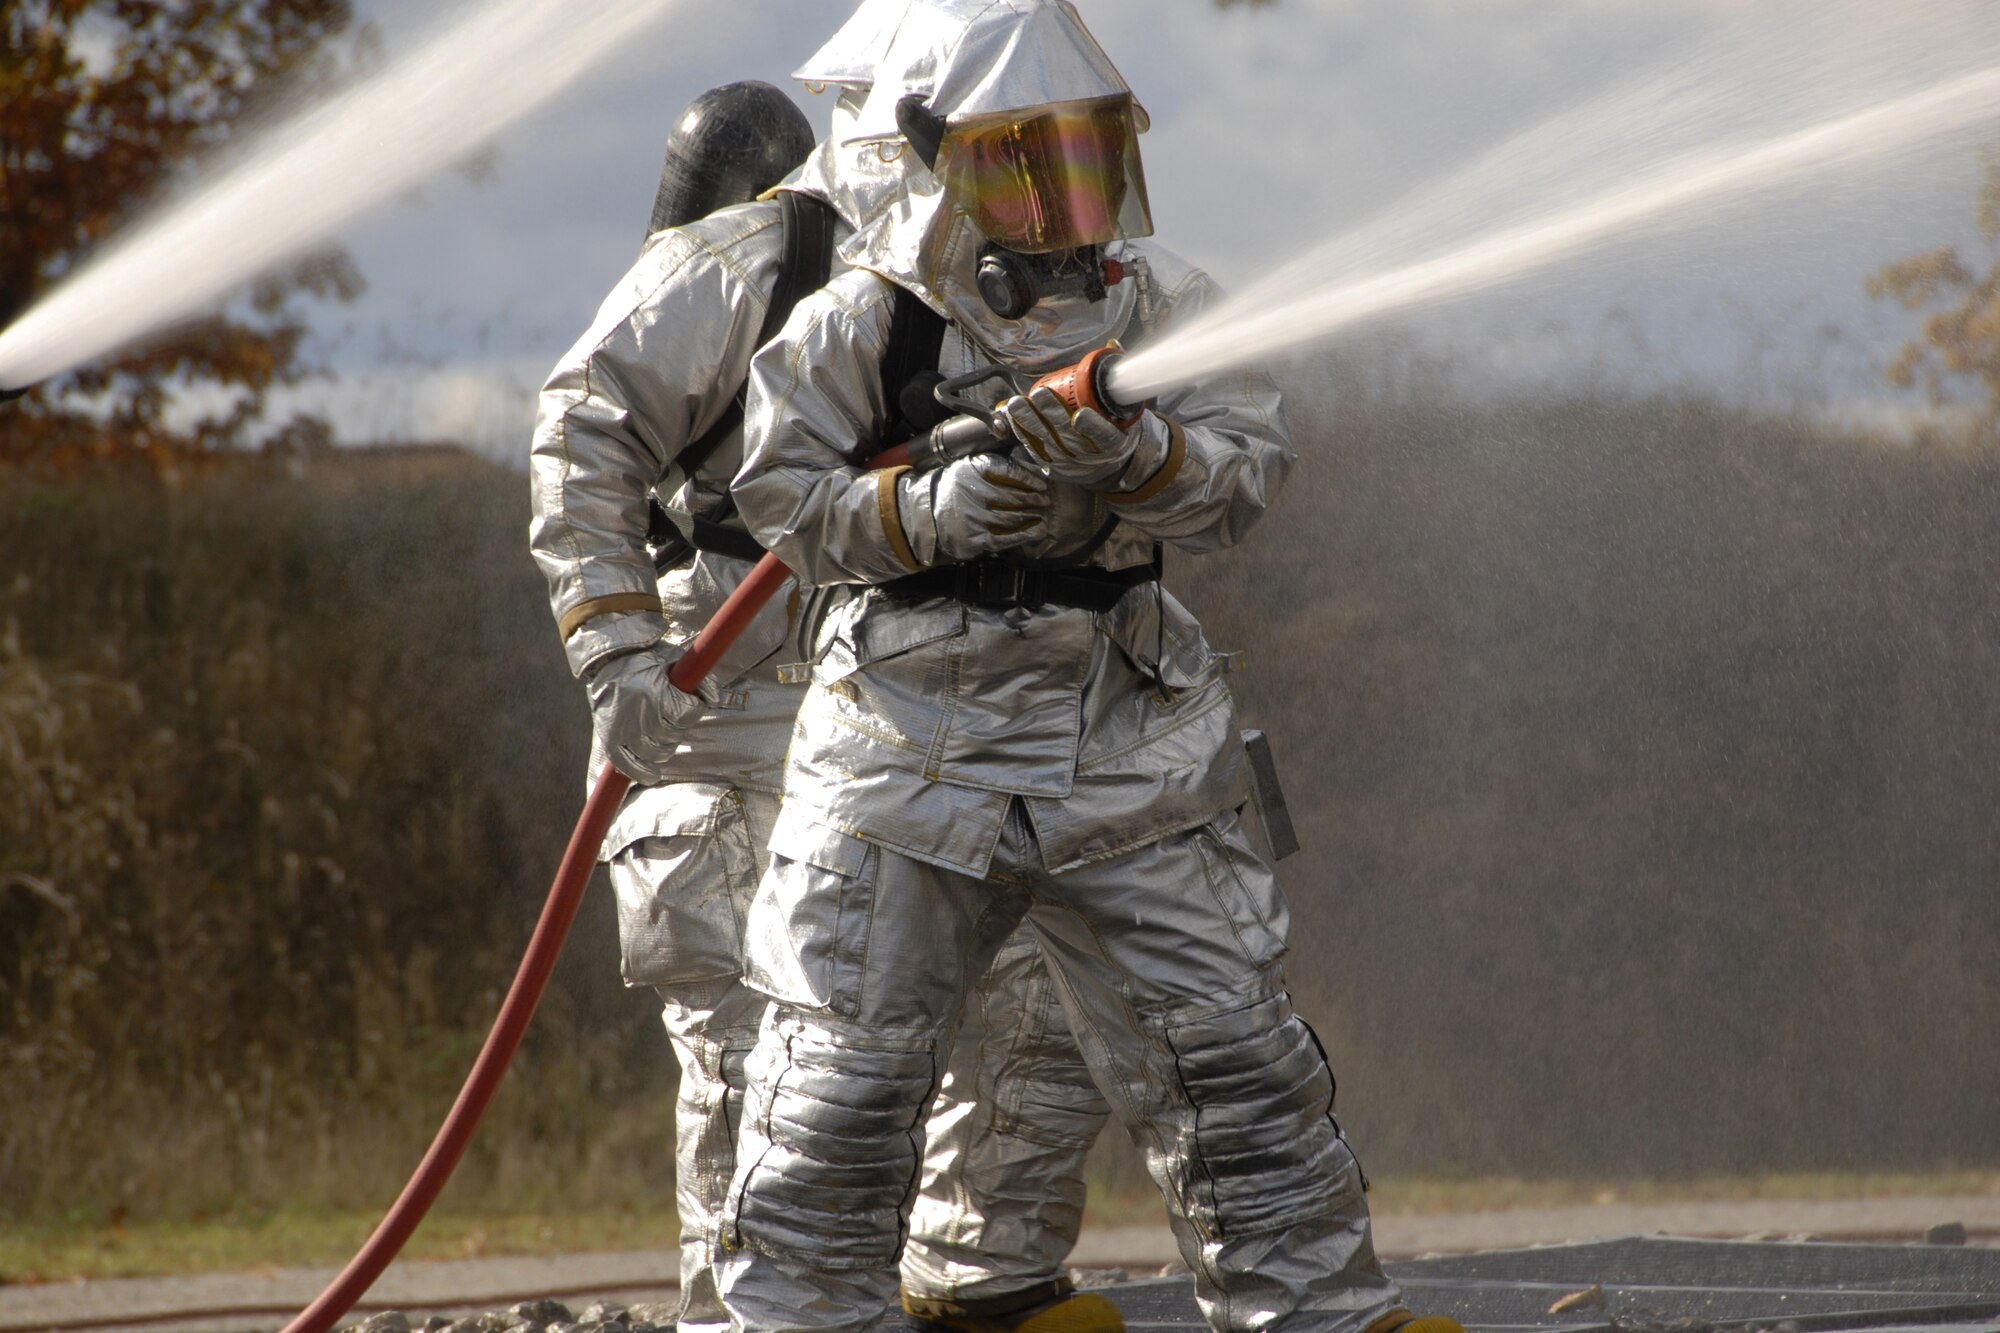 Staff Sgt. Keith Vasicek and Airman 1st Class Tony Pastrone battle a controlled fire during an aircraft crash site drill Oct. 18 at CRTC Training Base Alpena Mich.  Vasicek and  Pastone are Air force National Guard members attached to the 127th Fire Department Selfridge ANGB, Mich.  Vasicek and  Pastrone are both active fire fighters in both their civilian and military occupations. Combat Readiness Training is key to their alertness and spontaneity in emergency situations.  (U.S. Air Force photo by Tecnical Sgt. David S. Kujawa)